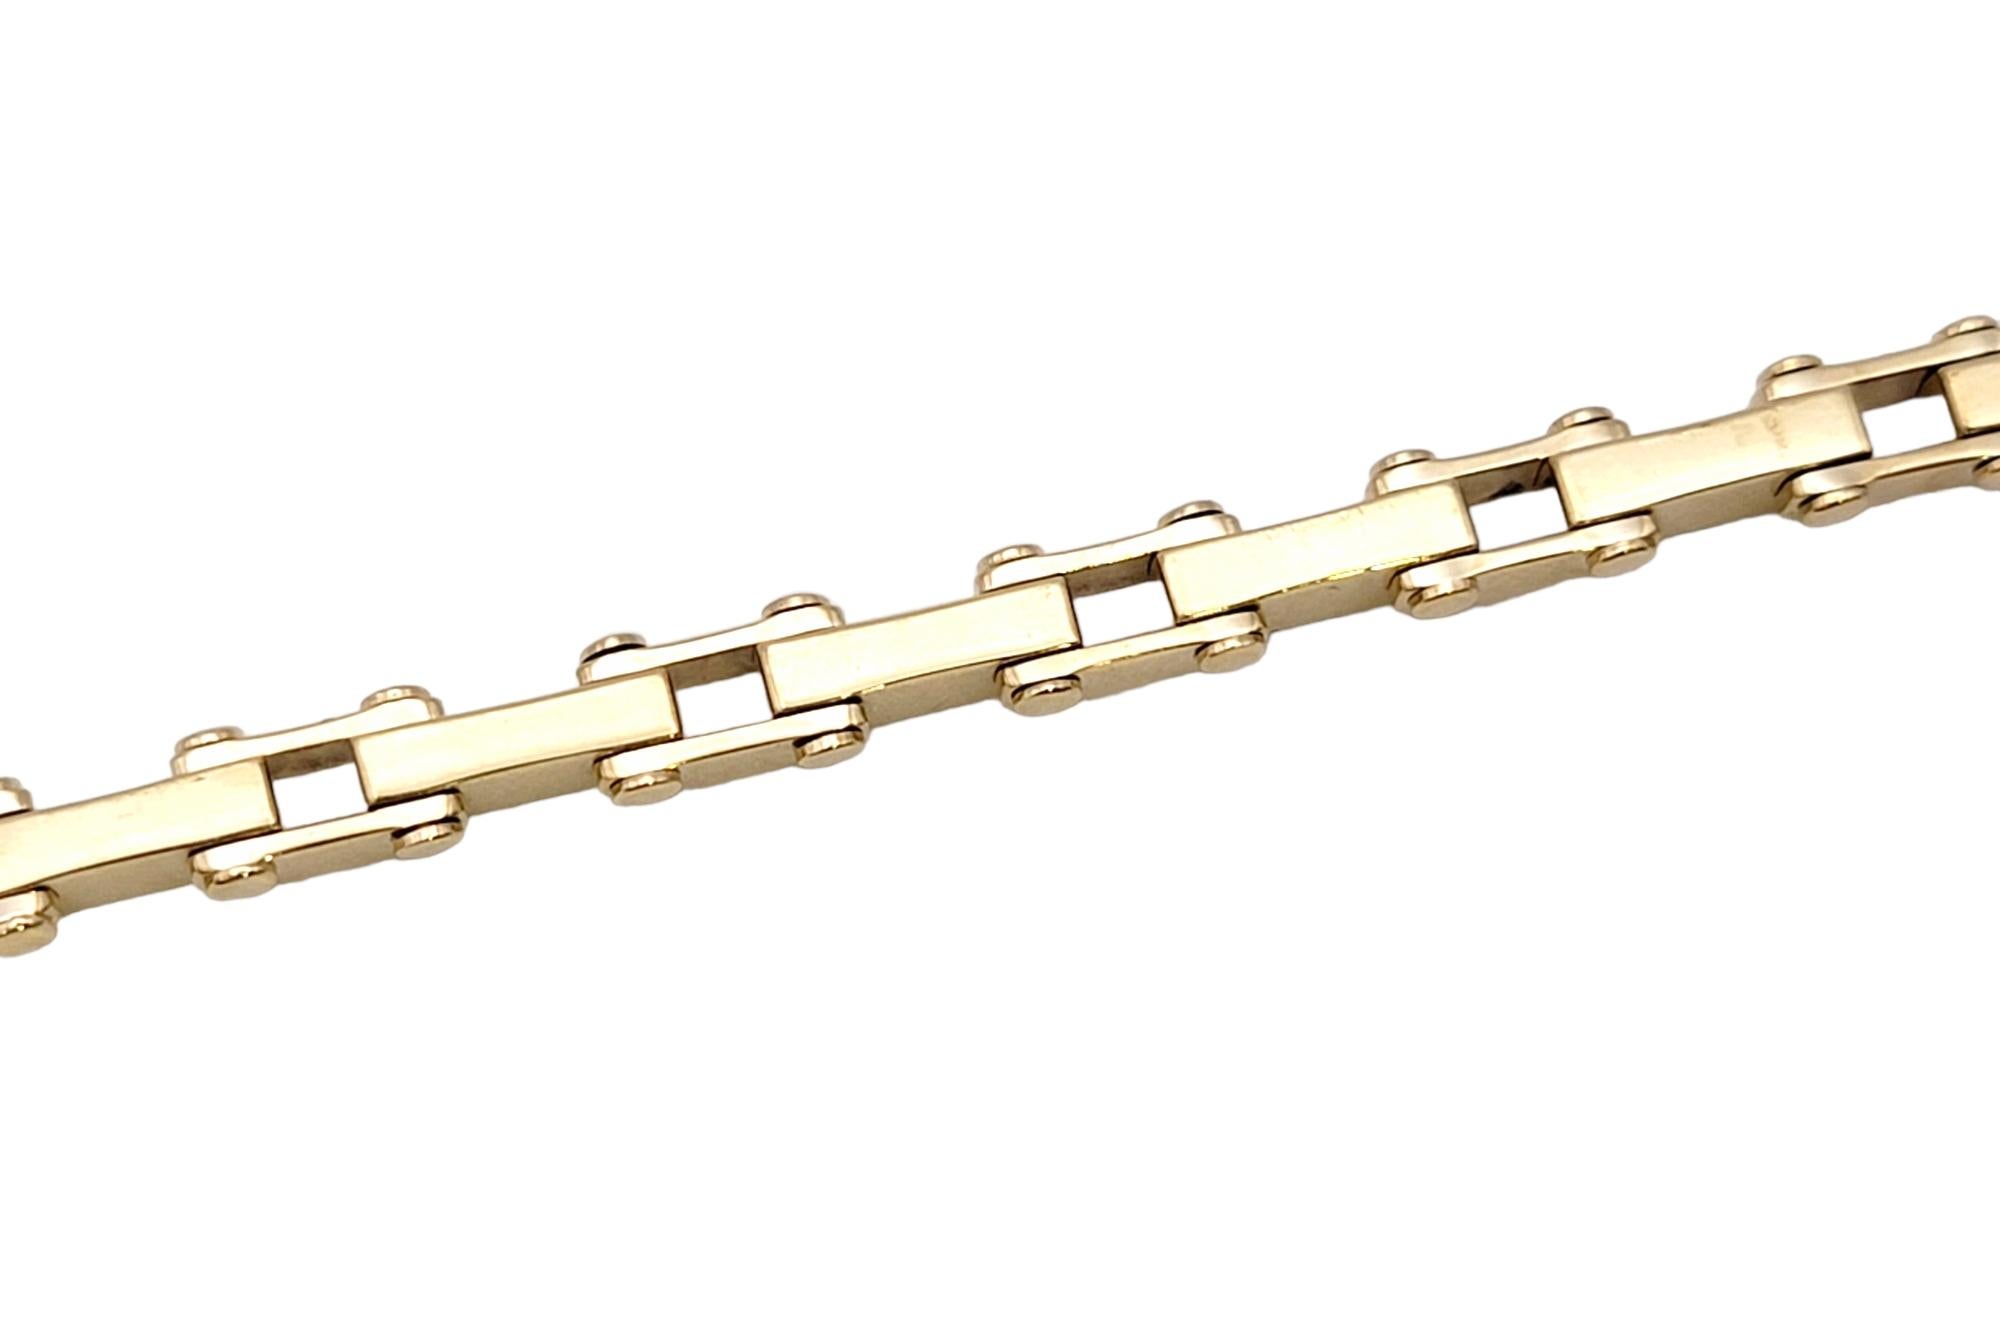 Narrow Bike Chain Style Link Bracelet with Diamonds in 14 Karat Yellow Gold In Good Condition For Sale In Scottsdale, AZ